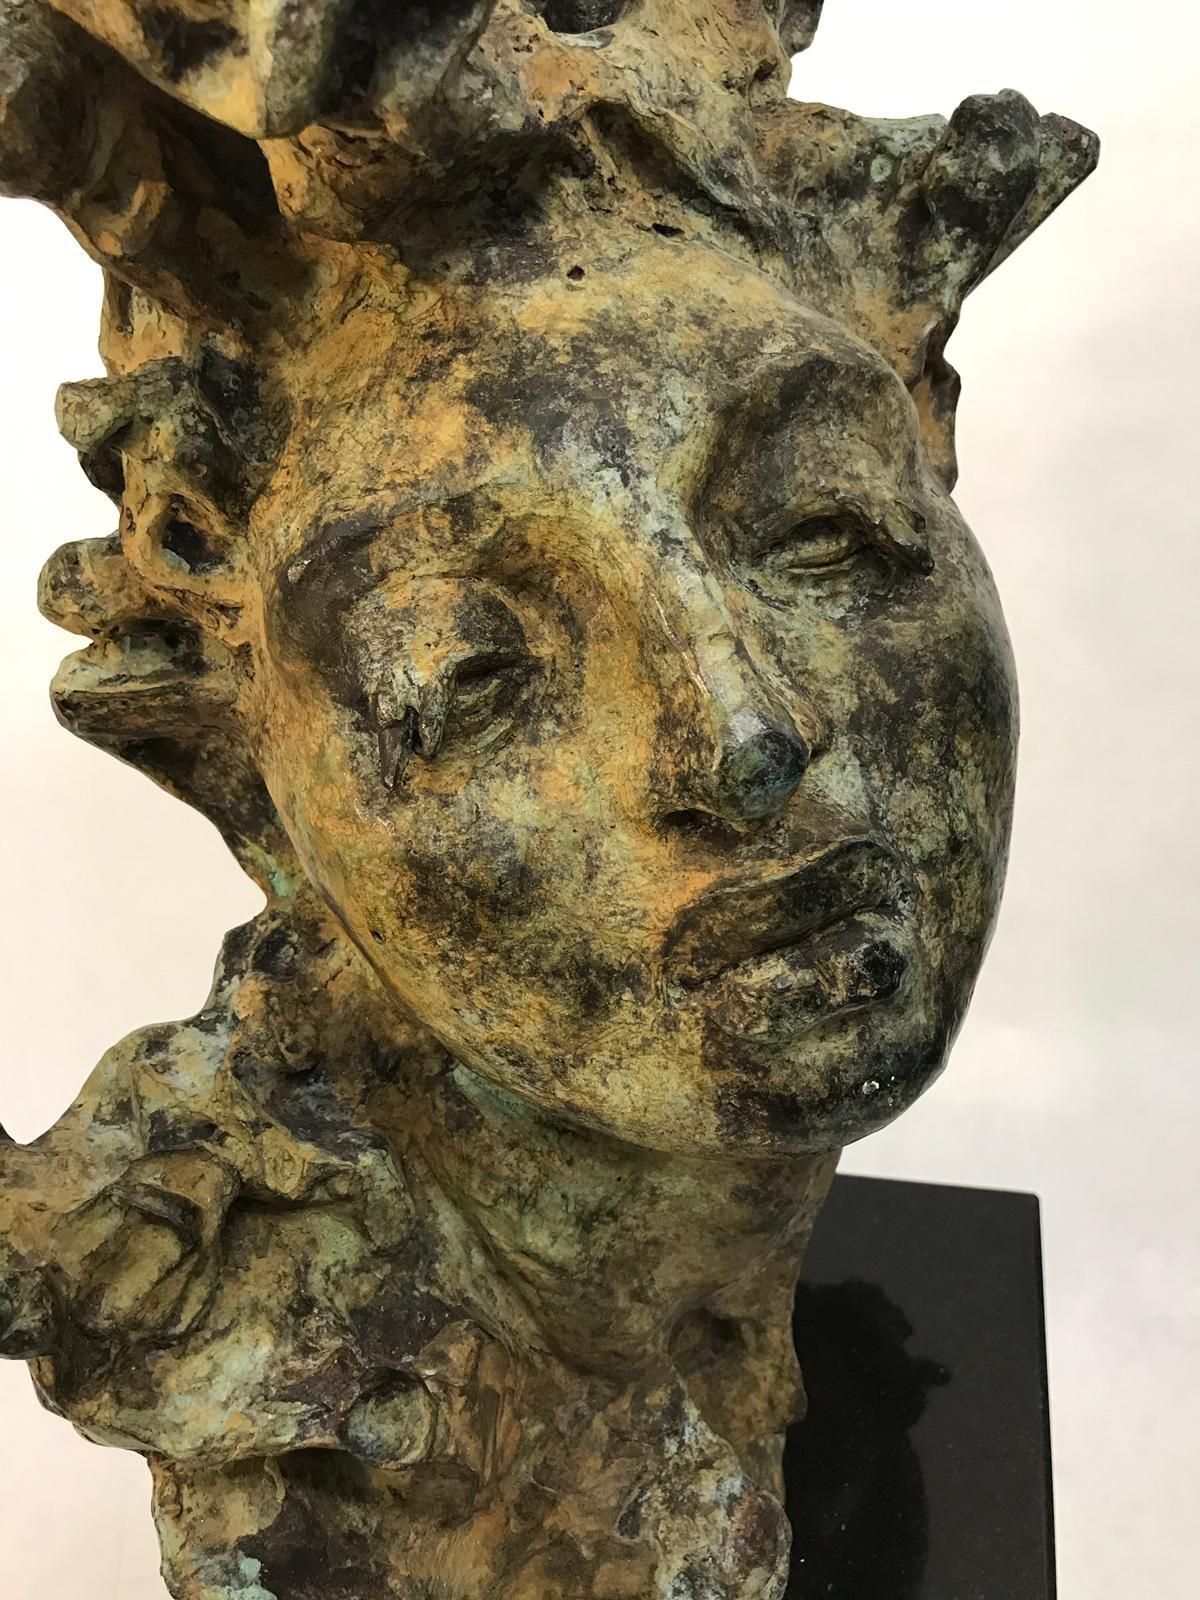 Mounted on black granite base, this expressive and beautiful bust in verdigris bronze can be appreciated from all angles. The art of Javier Marin offers a singular vision of the human spirit. If only one word in the English language described the